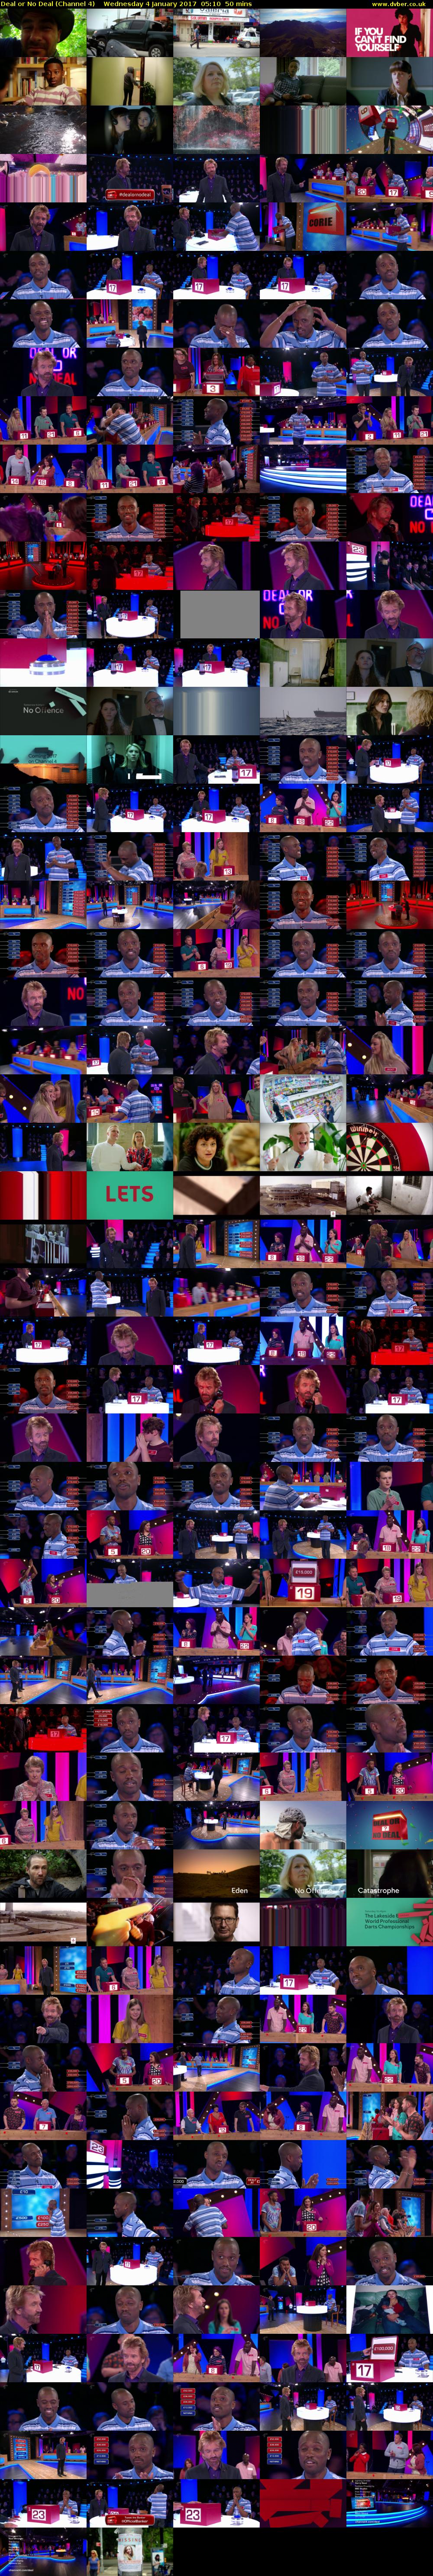 Deal or No Deal (Channel 4) Wednesday 4 January 2017 05:10 - 06:00